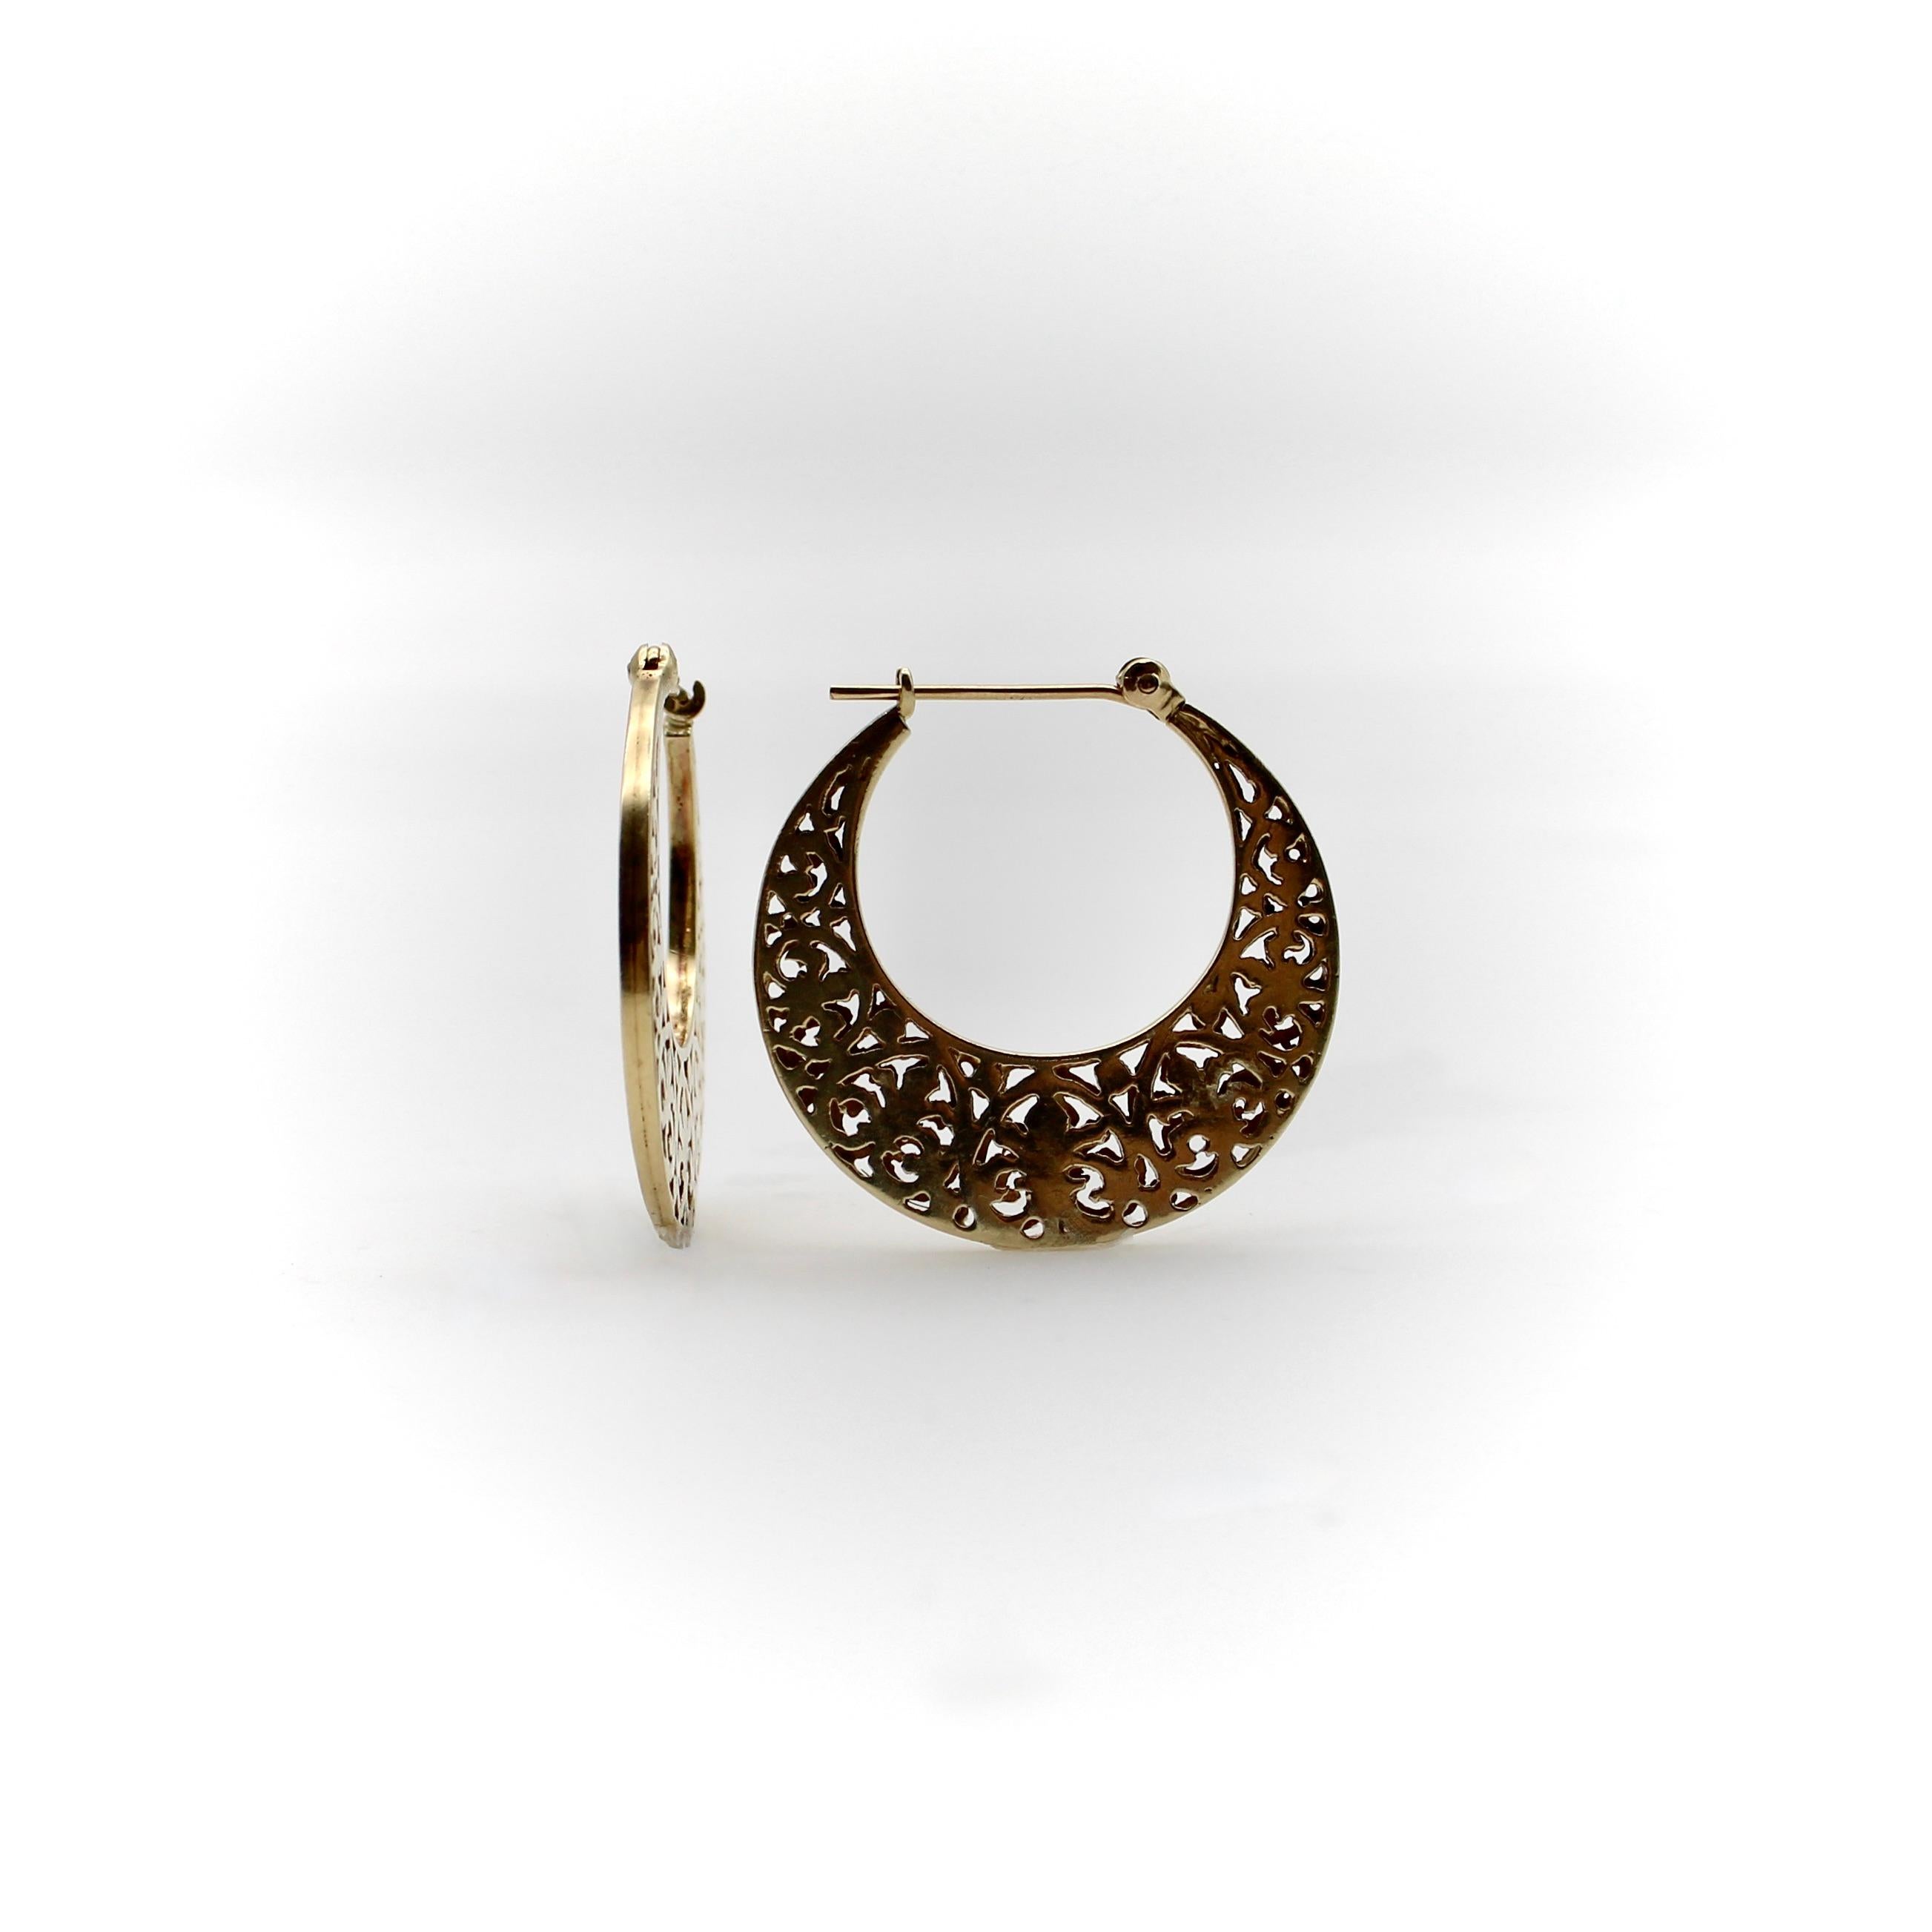 A very special pair of 14k gold vintage hoops that, when viewed from the side, are shaped like crescent moons. The earrings have a reticulated pattern that’s based on a fleur-de-lys motif. They consist of two layers of gold sandwiched on top of each